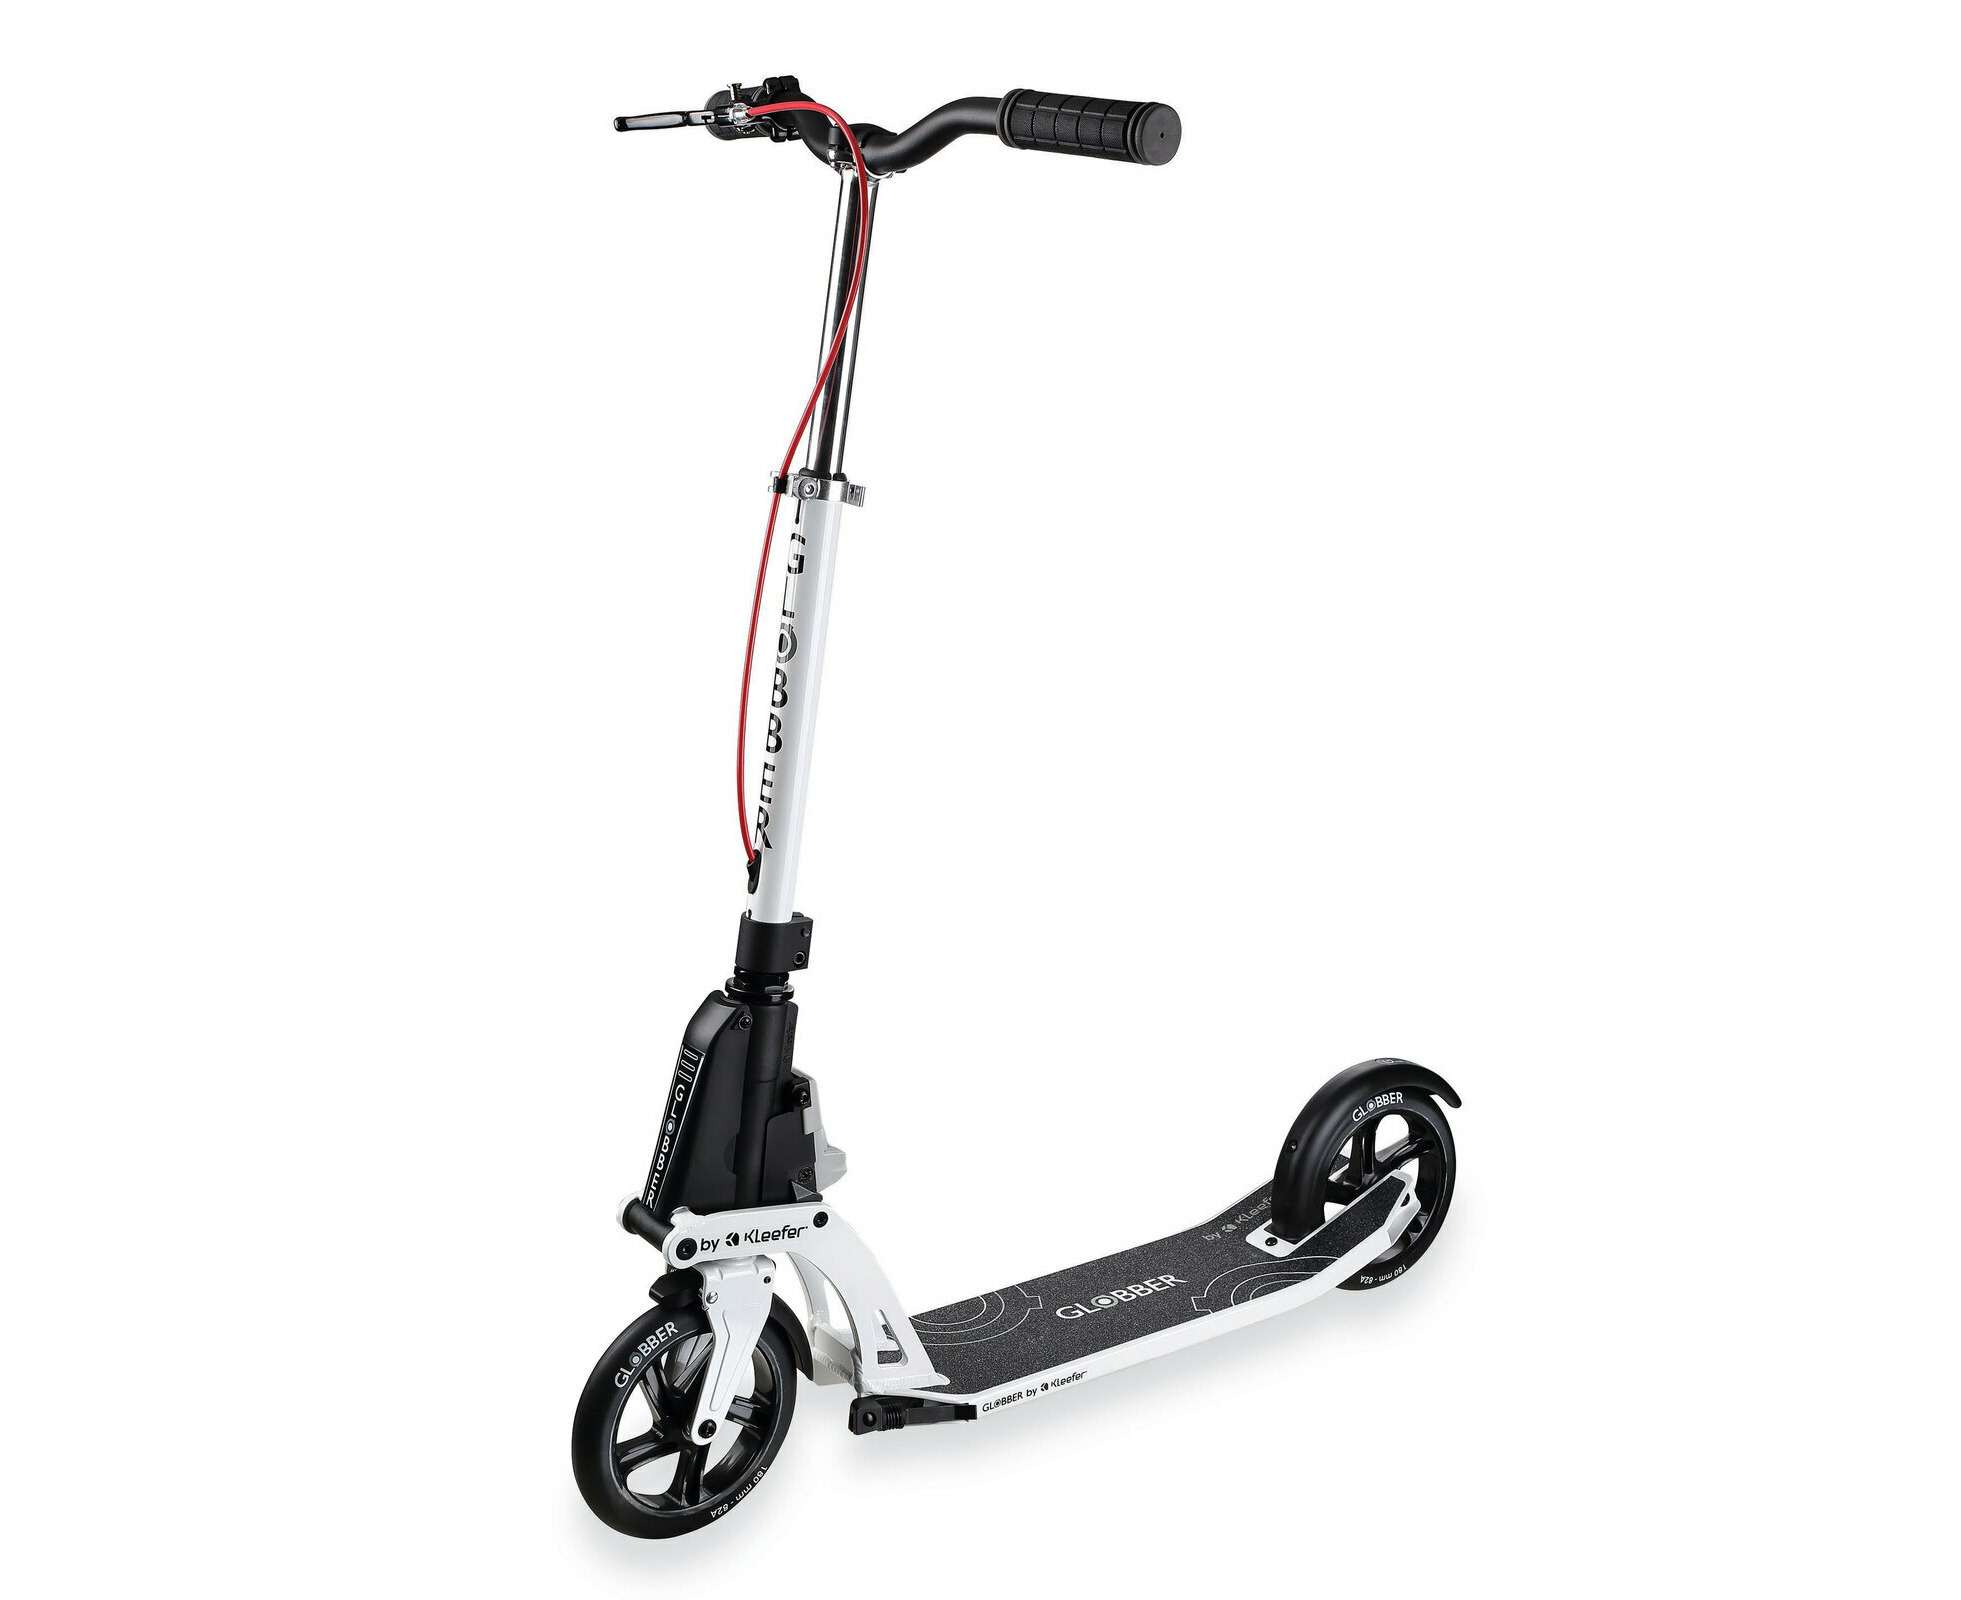  Globber NL Series 2-Wheel Kick Scooter for Kids, Teens and  Adults, Foldable Kick Scooter with Adjustable T-Bar, Black & Grey : Sports  & Outdoors